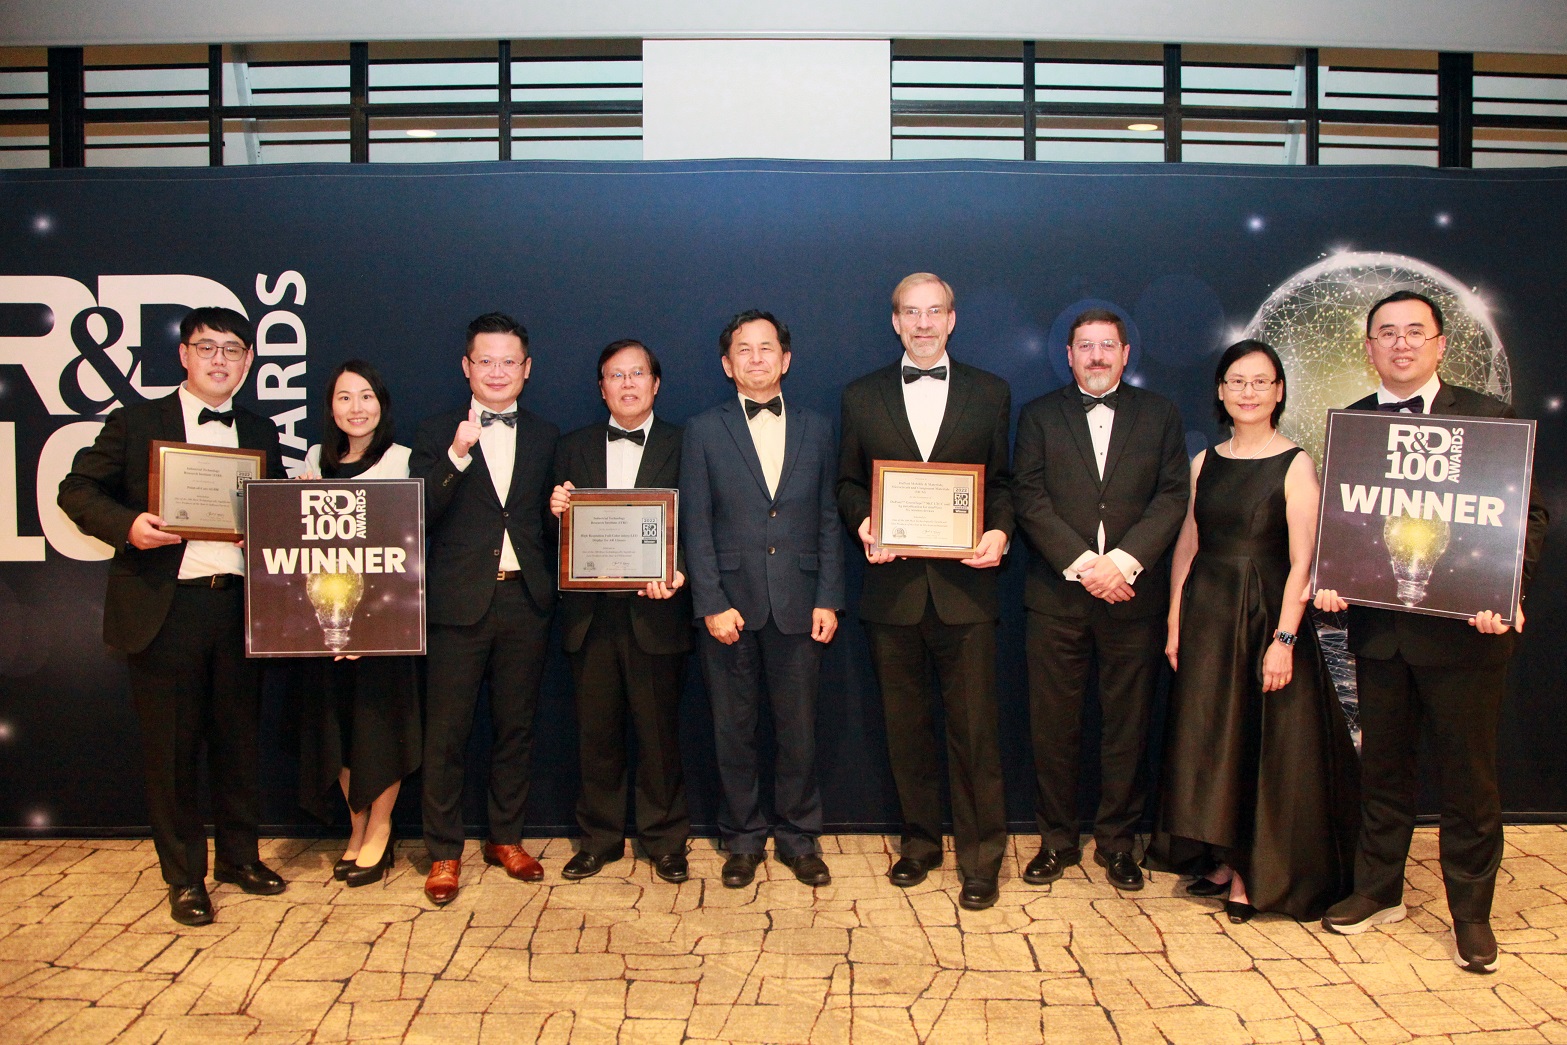 ITRI and Celanese<sup>®</sup> Micromax™ representatives accepted the awards at the R&D 100 Awards Gala in San Diego on November 17.